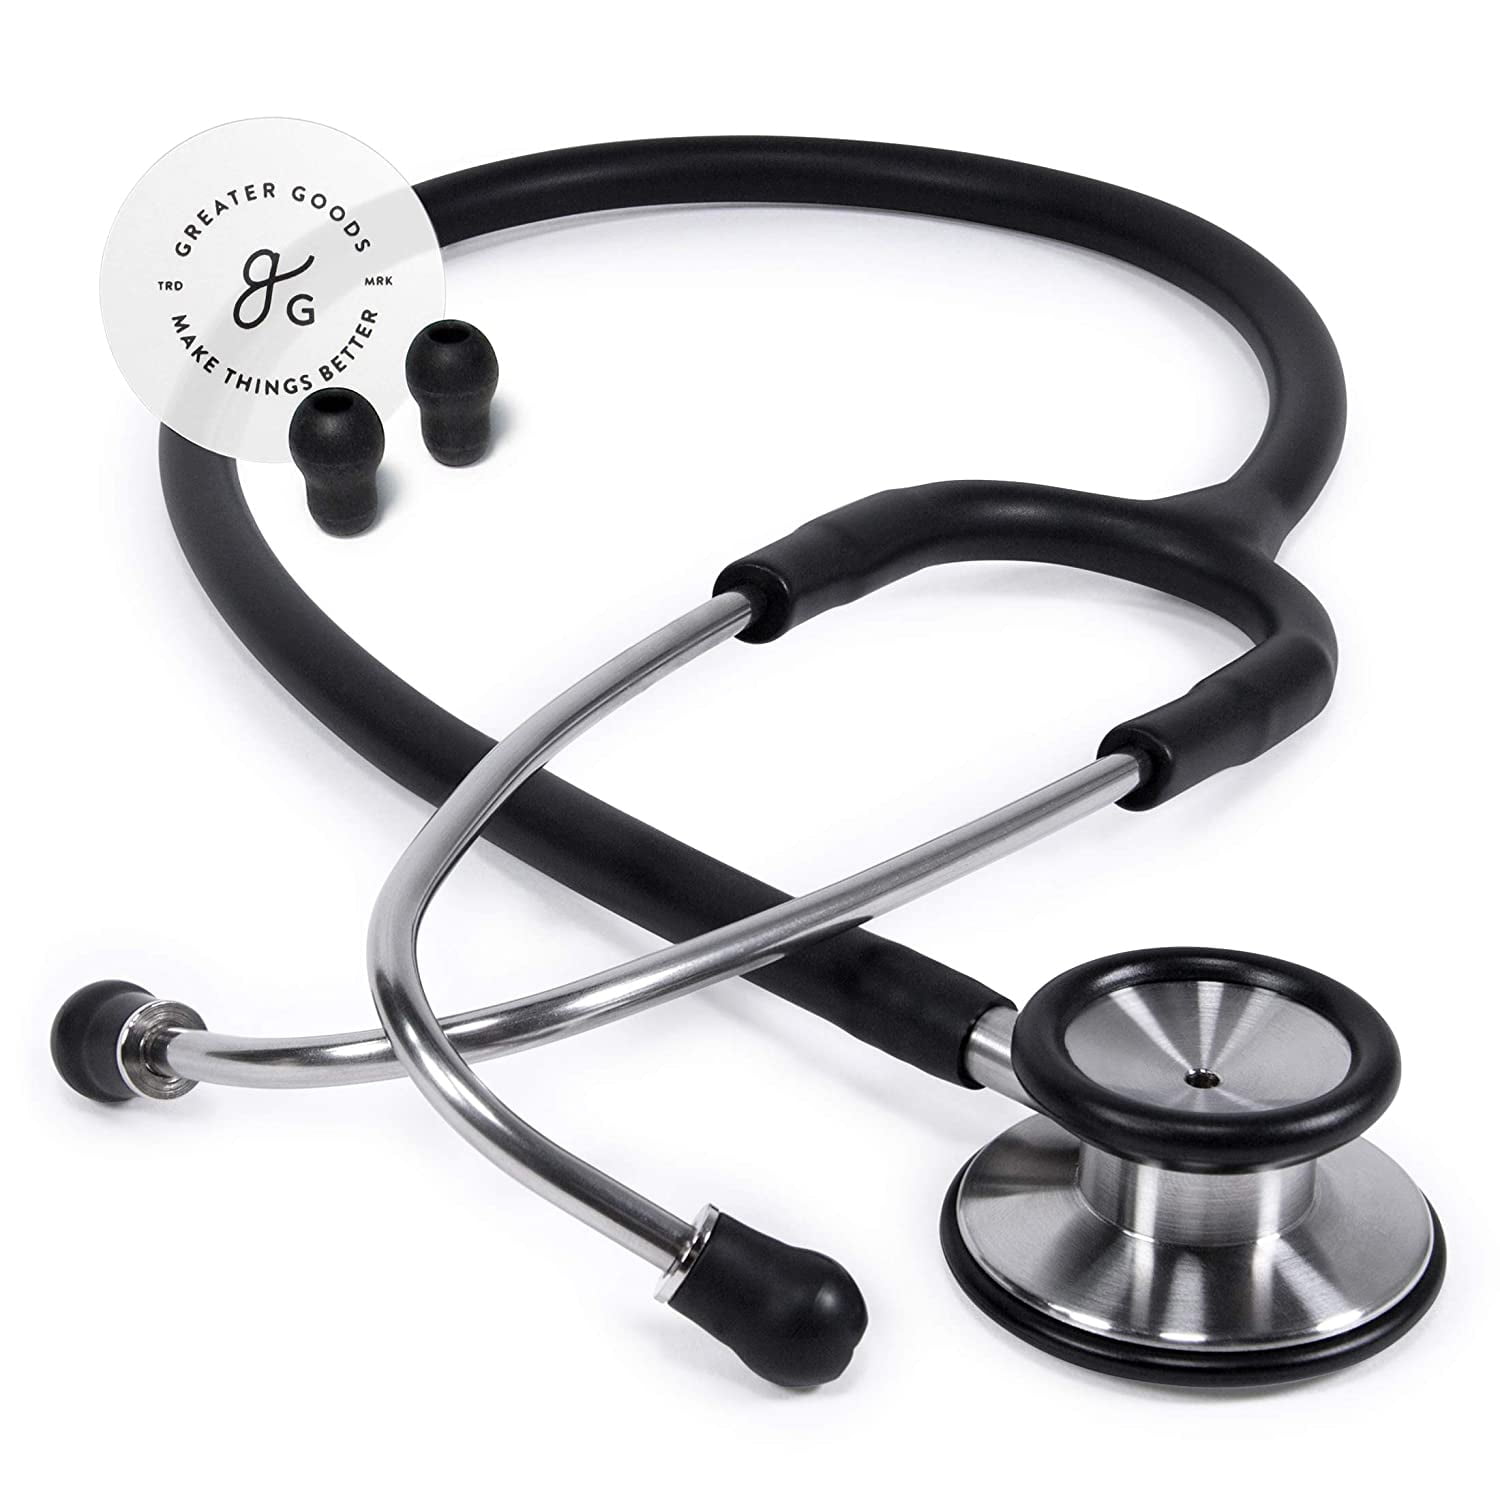 Greater Goods Dual-Head Stethoscope, Classic Design for Routine